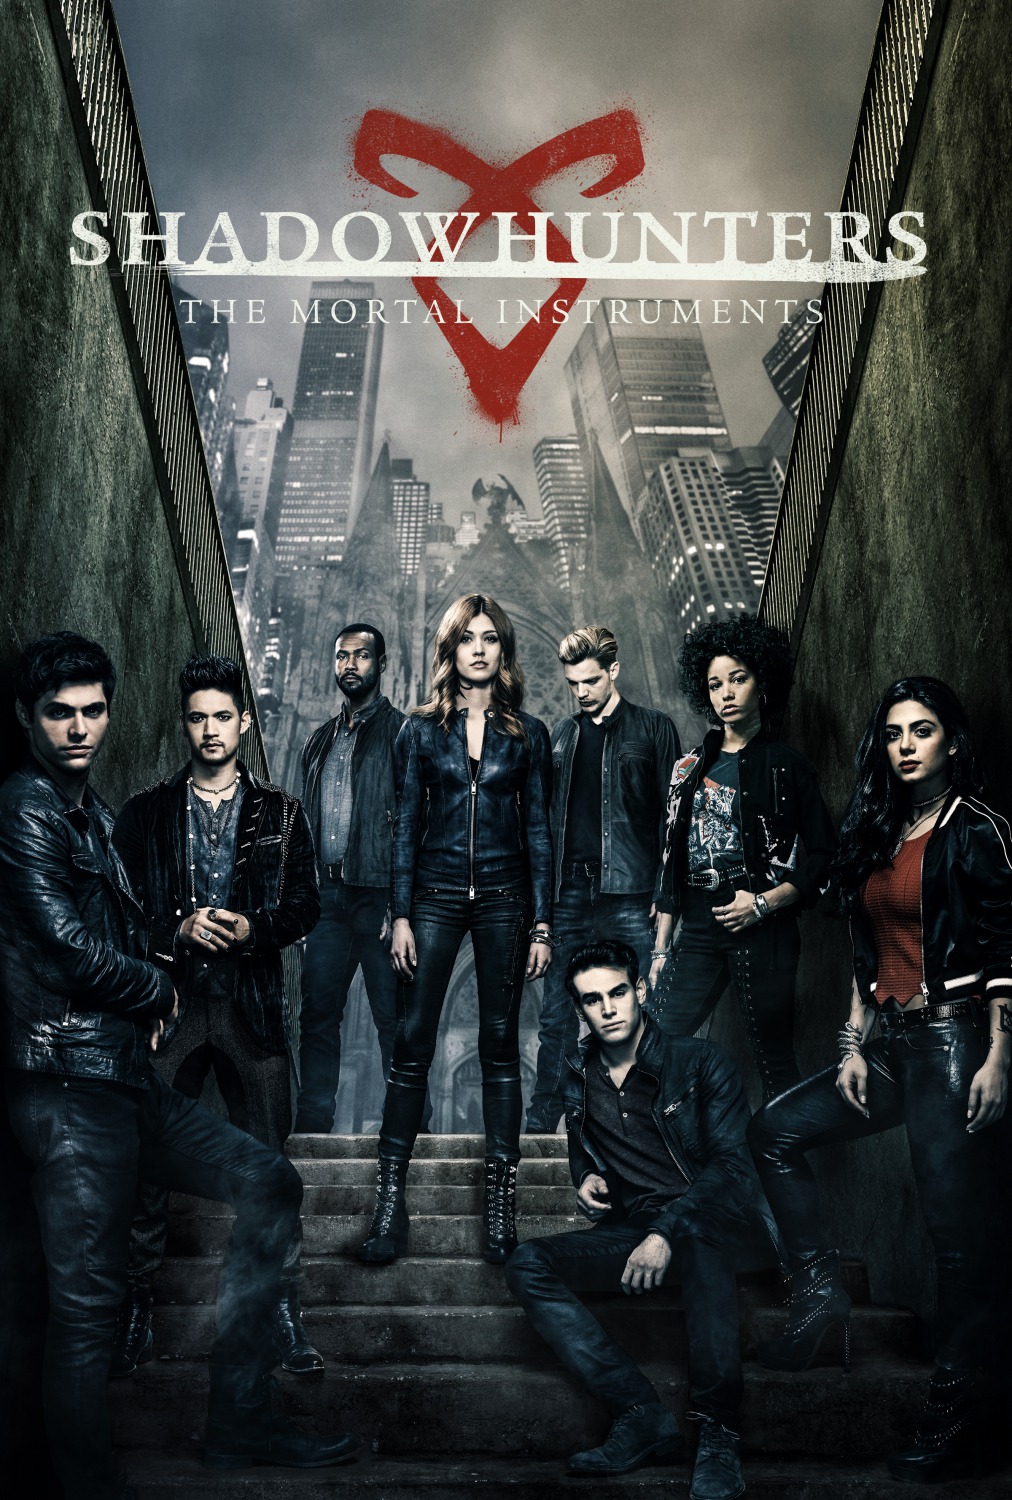 Extra Large TV Poster Image for Shadowhunters: The Mortal Instruments (#18 of 19)